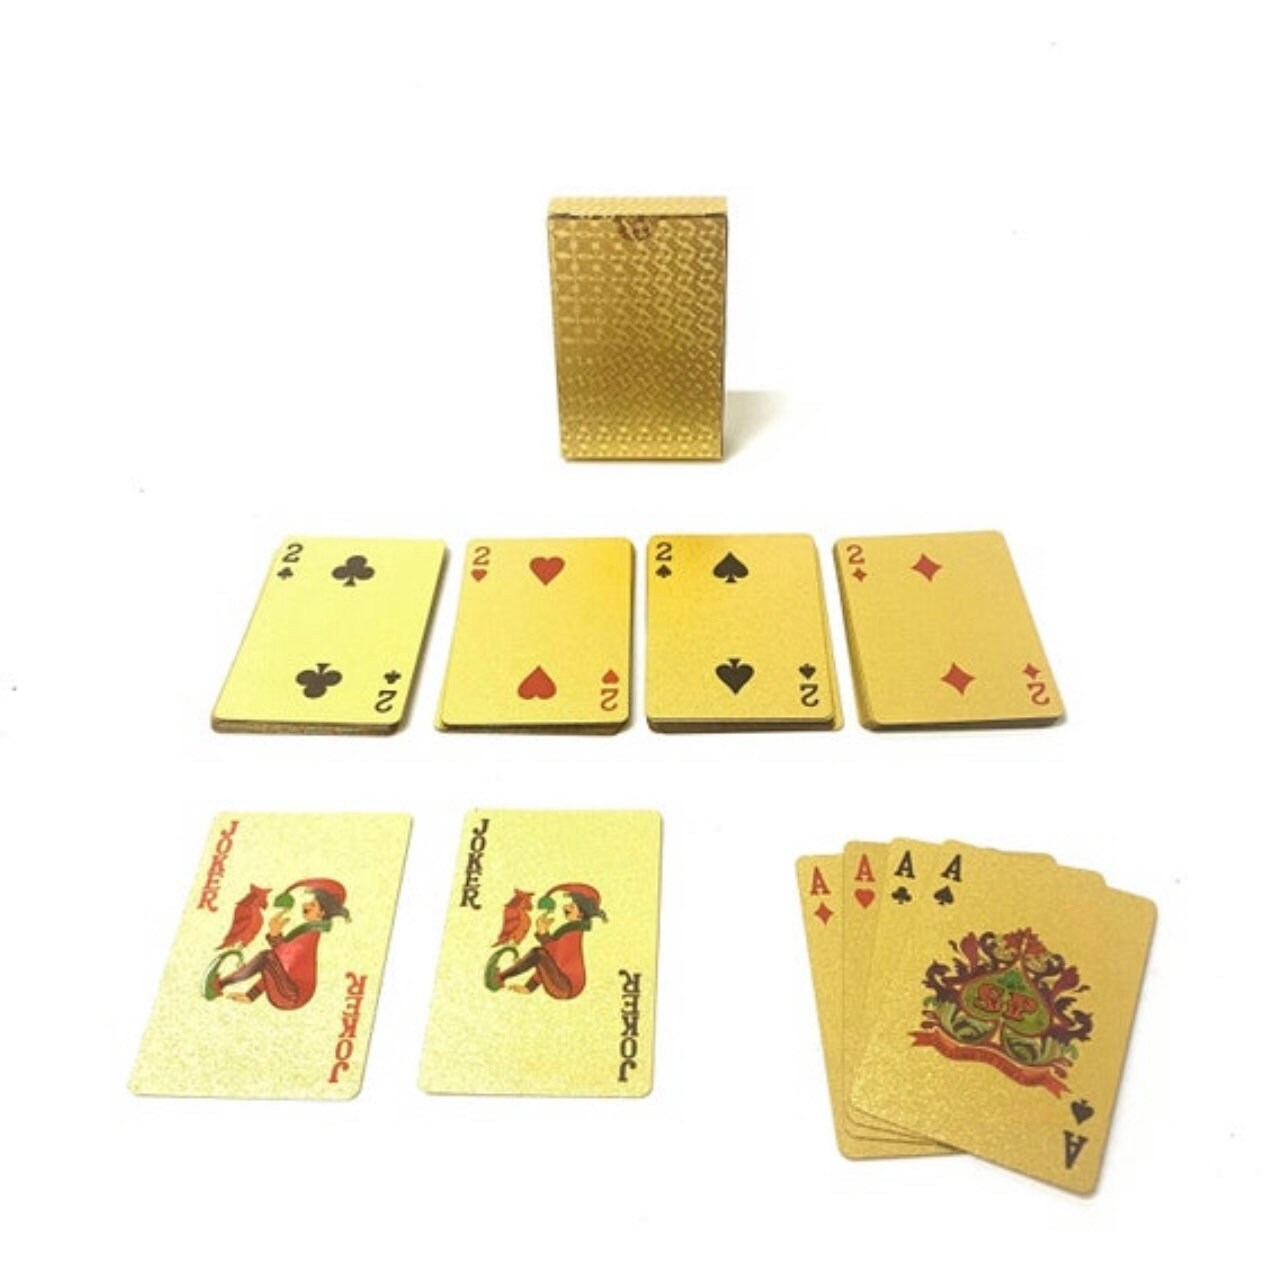 KALIFANO Luxury Gold Plated Playing Cards - Las Vegas Themed Waterproof Gold Foil Deck of Cards with Uses from Magic to Poker with Certificate of